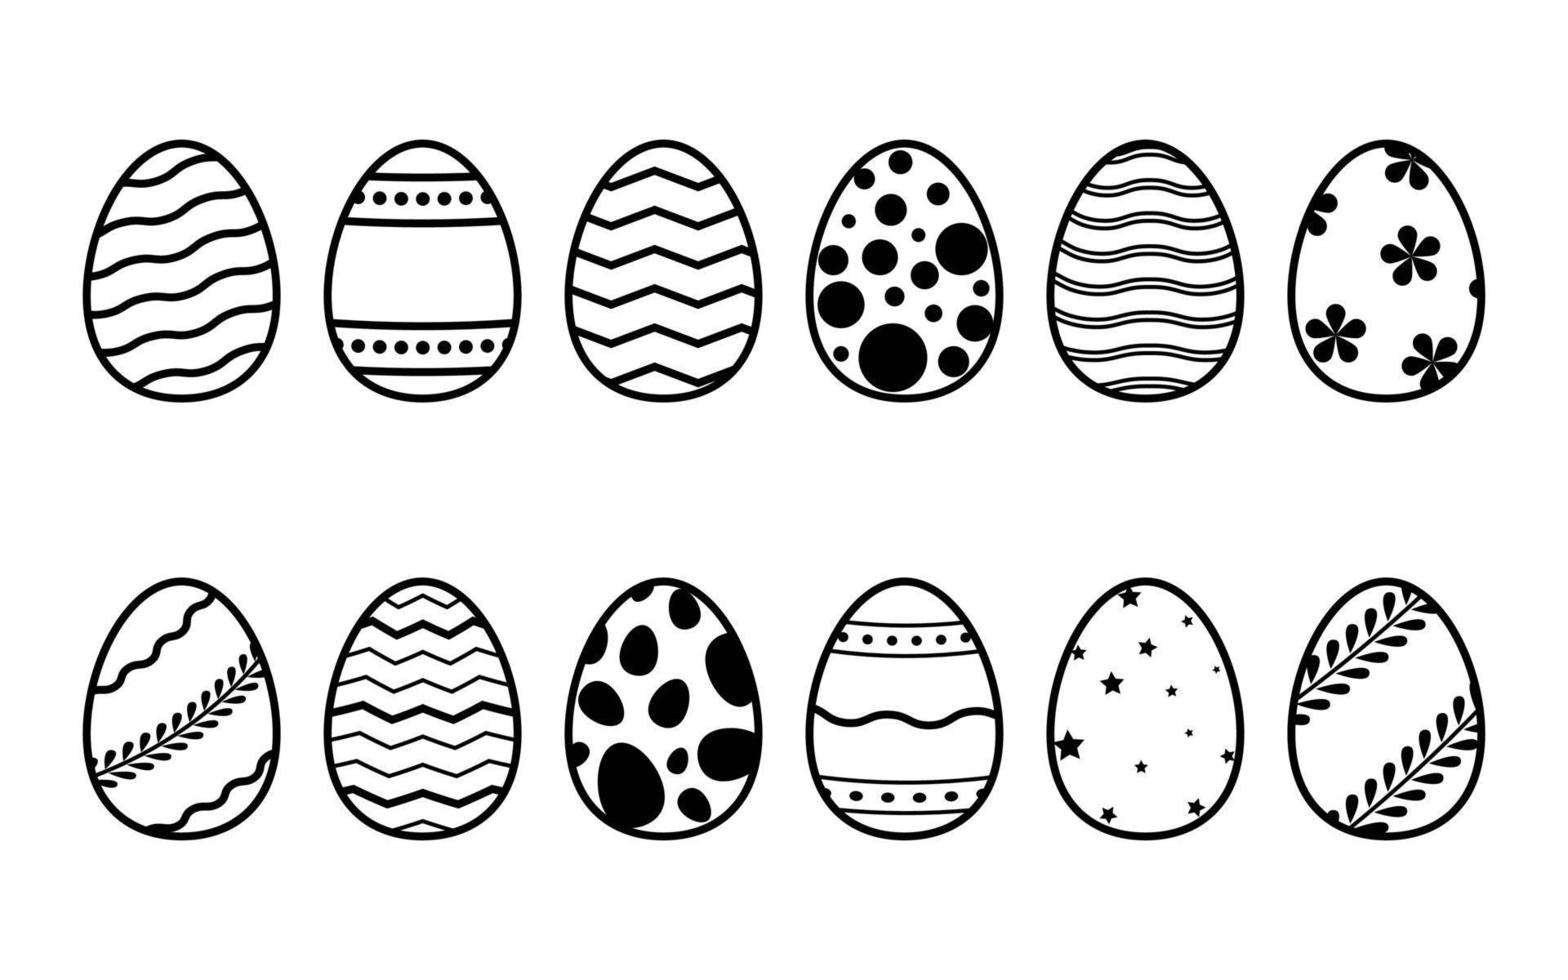 Vector Collection of decorated Easter eggs in doodle style isolated on white background. Bundle of outlined icons with different pattern for spring holiday with various ornaments